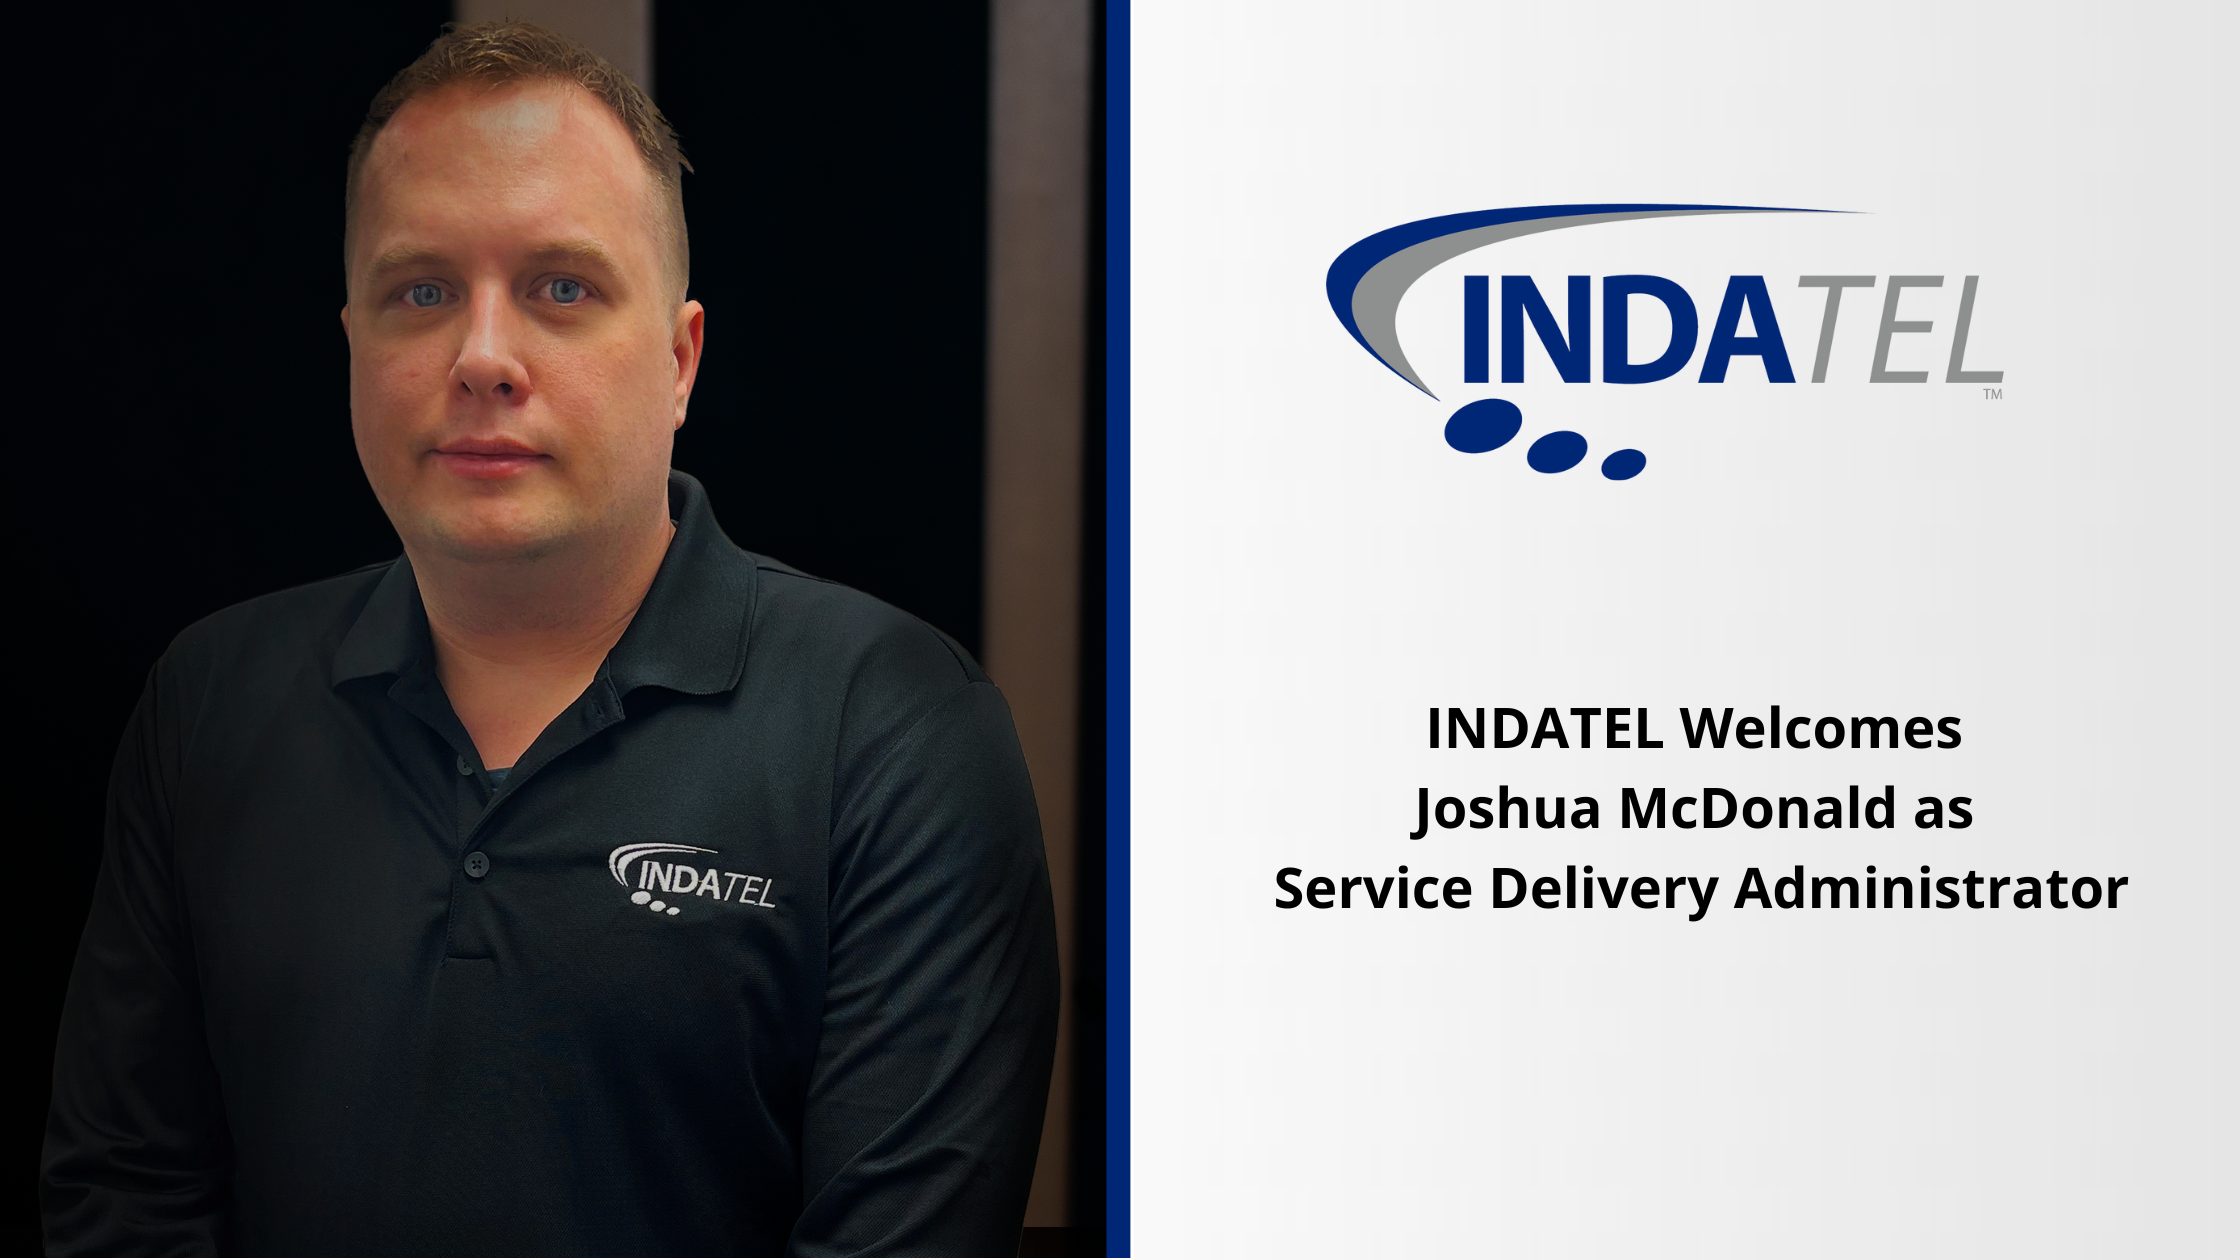 INDATEL Welcomes Joshua McDonald as Service Delivery Administrator featured image